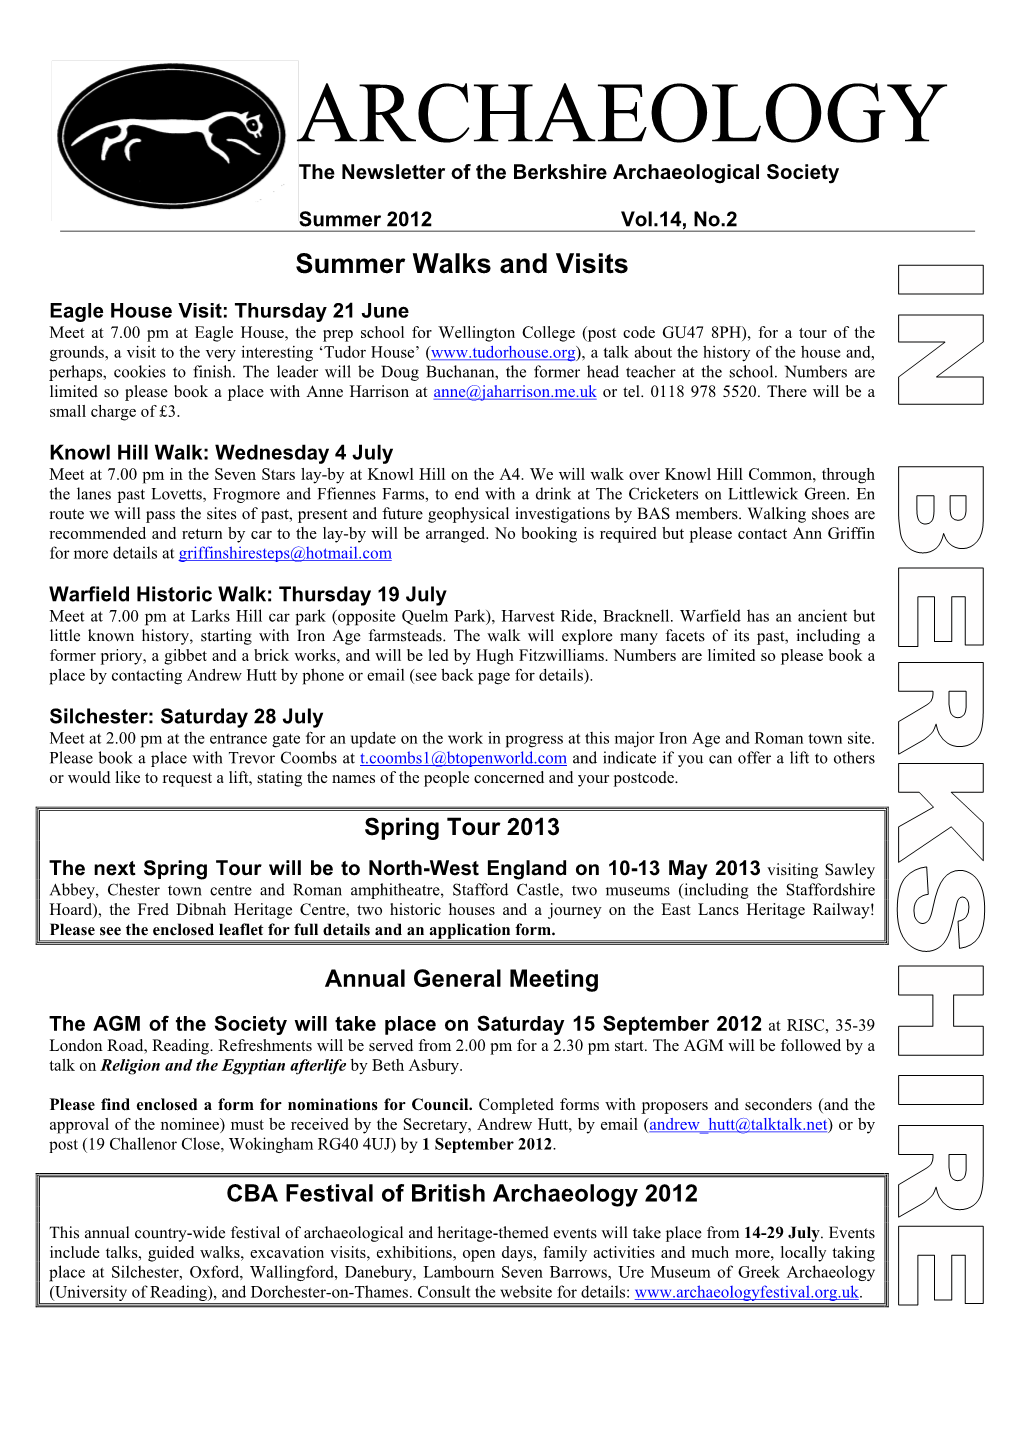 ARCHAEOLOGY the Newsletter of the Berkshire Archaeological Society